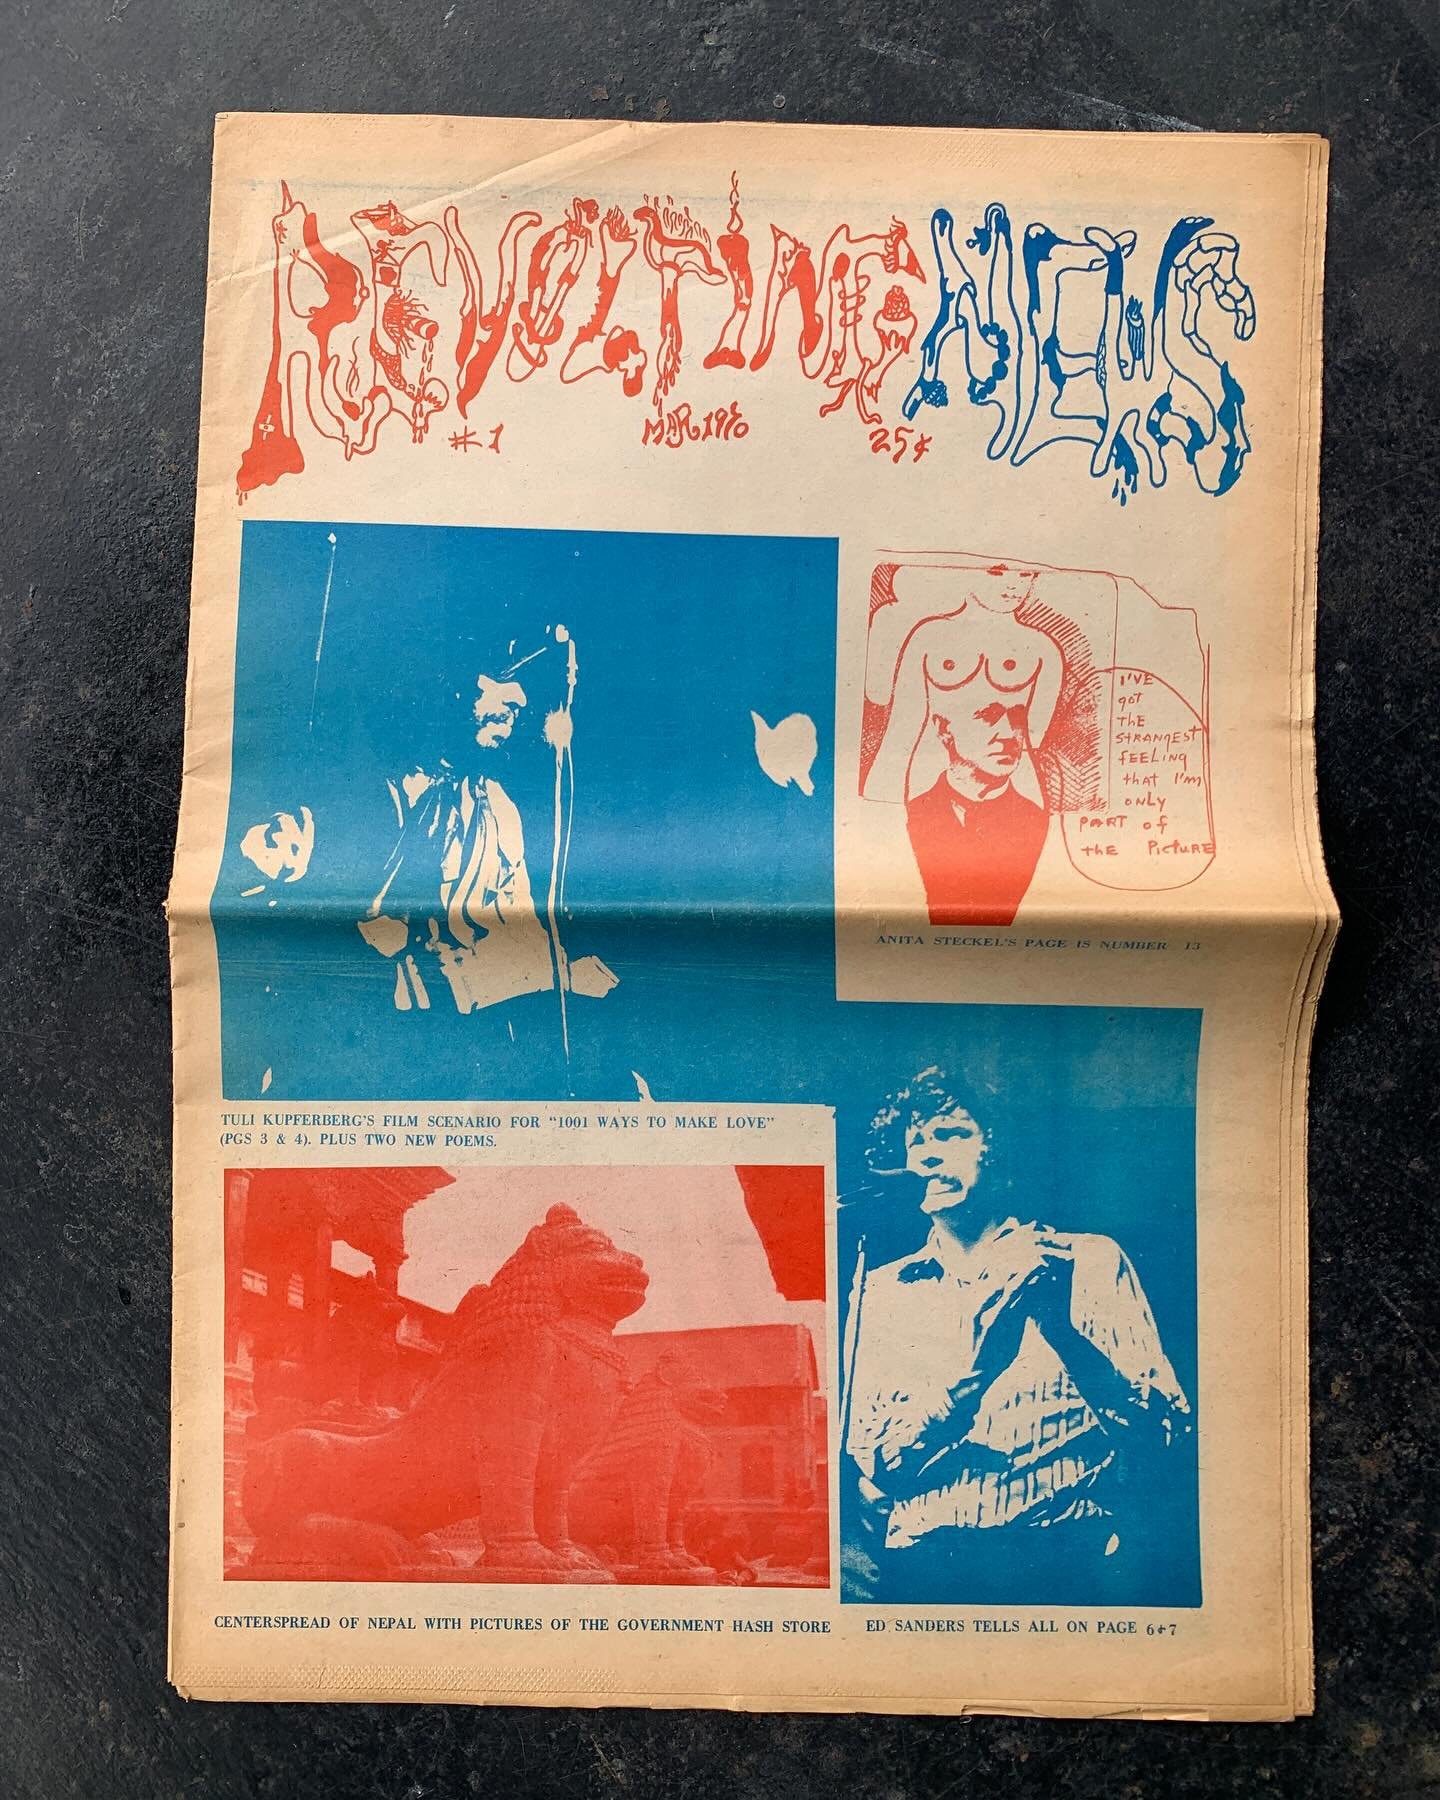 Revolting News from March 1970, one  B P f several underground press magazines I&rsquo;m taking into the shop. This stuff i absolutely love, and is increasingly hard to come by.
#undergroundpress
#radicalpolitics
#hippieculture 
#1970s
#antiestablish